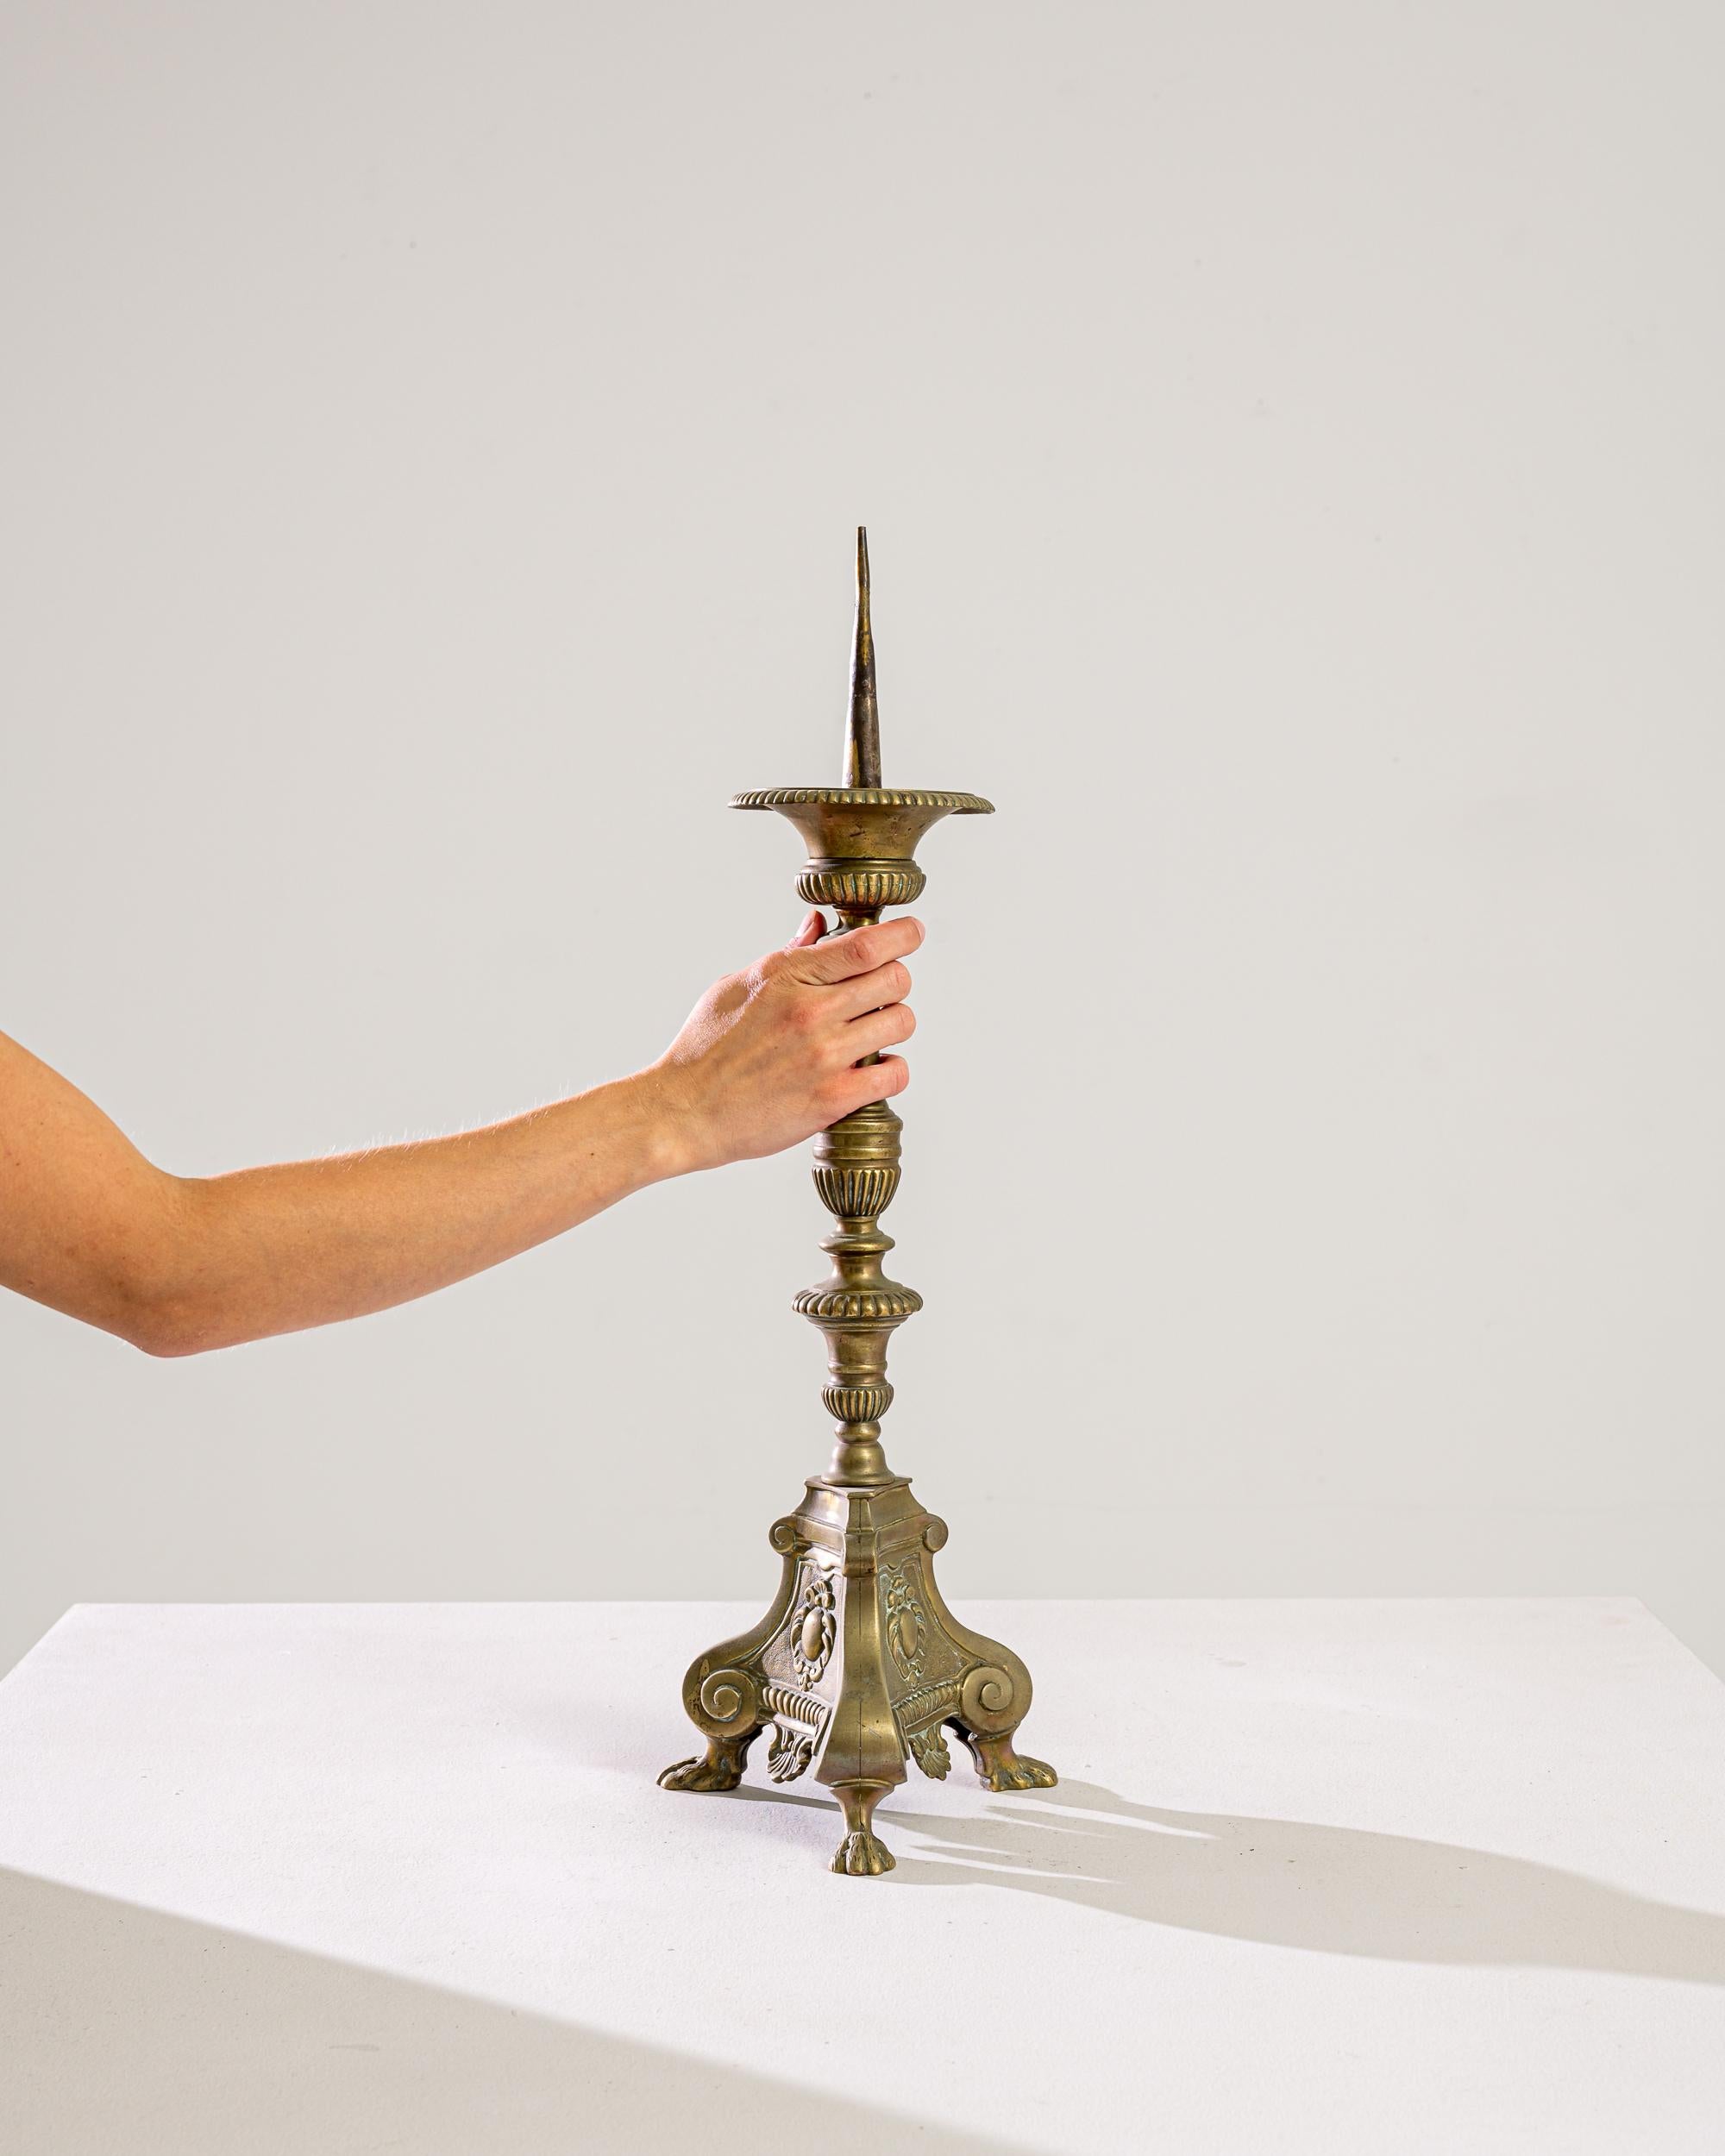 Step into a world of timeless elegance with this exquisite 1900s French Brass Candlestick, a treasured piece from a bygone era that whispers tales of old-world charm and sophisticated dinners by candlelight. Standing proud with a height that